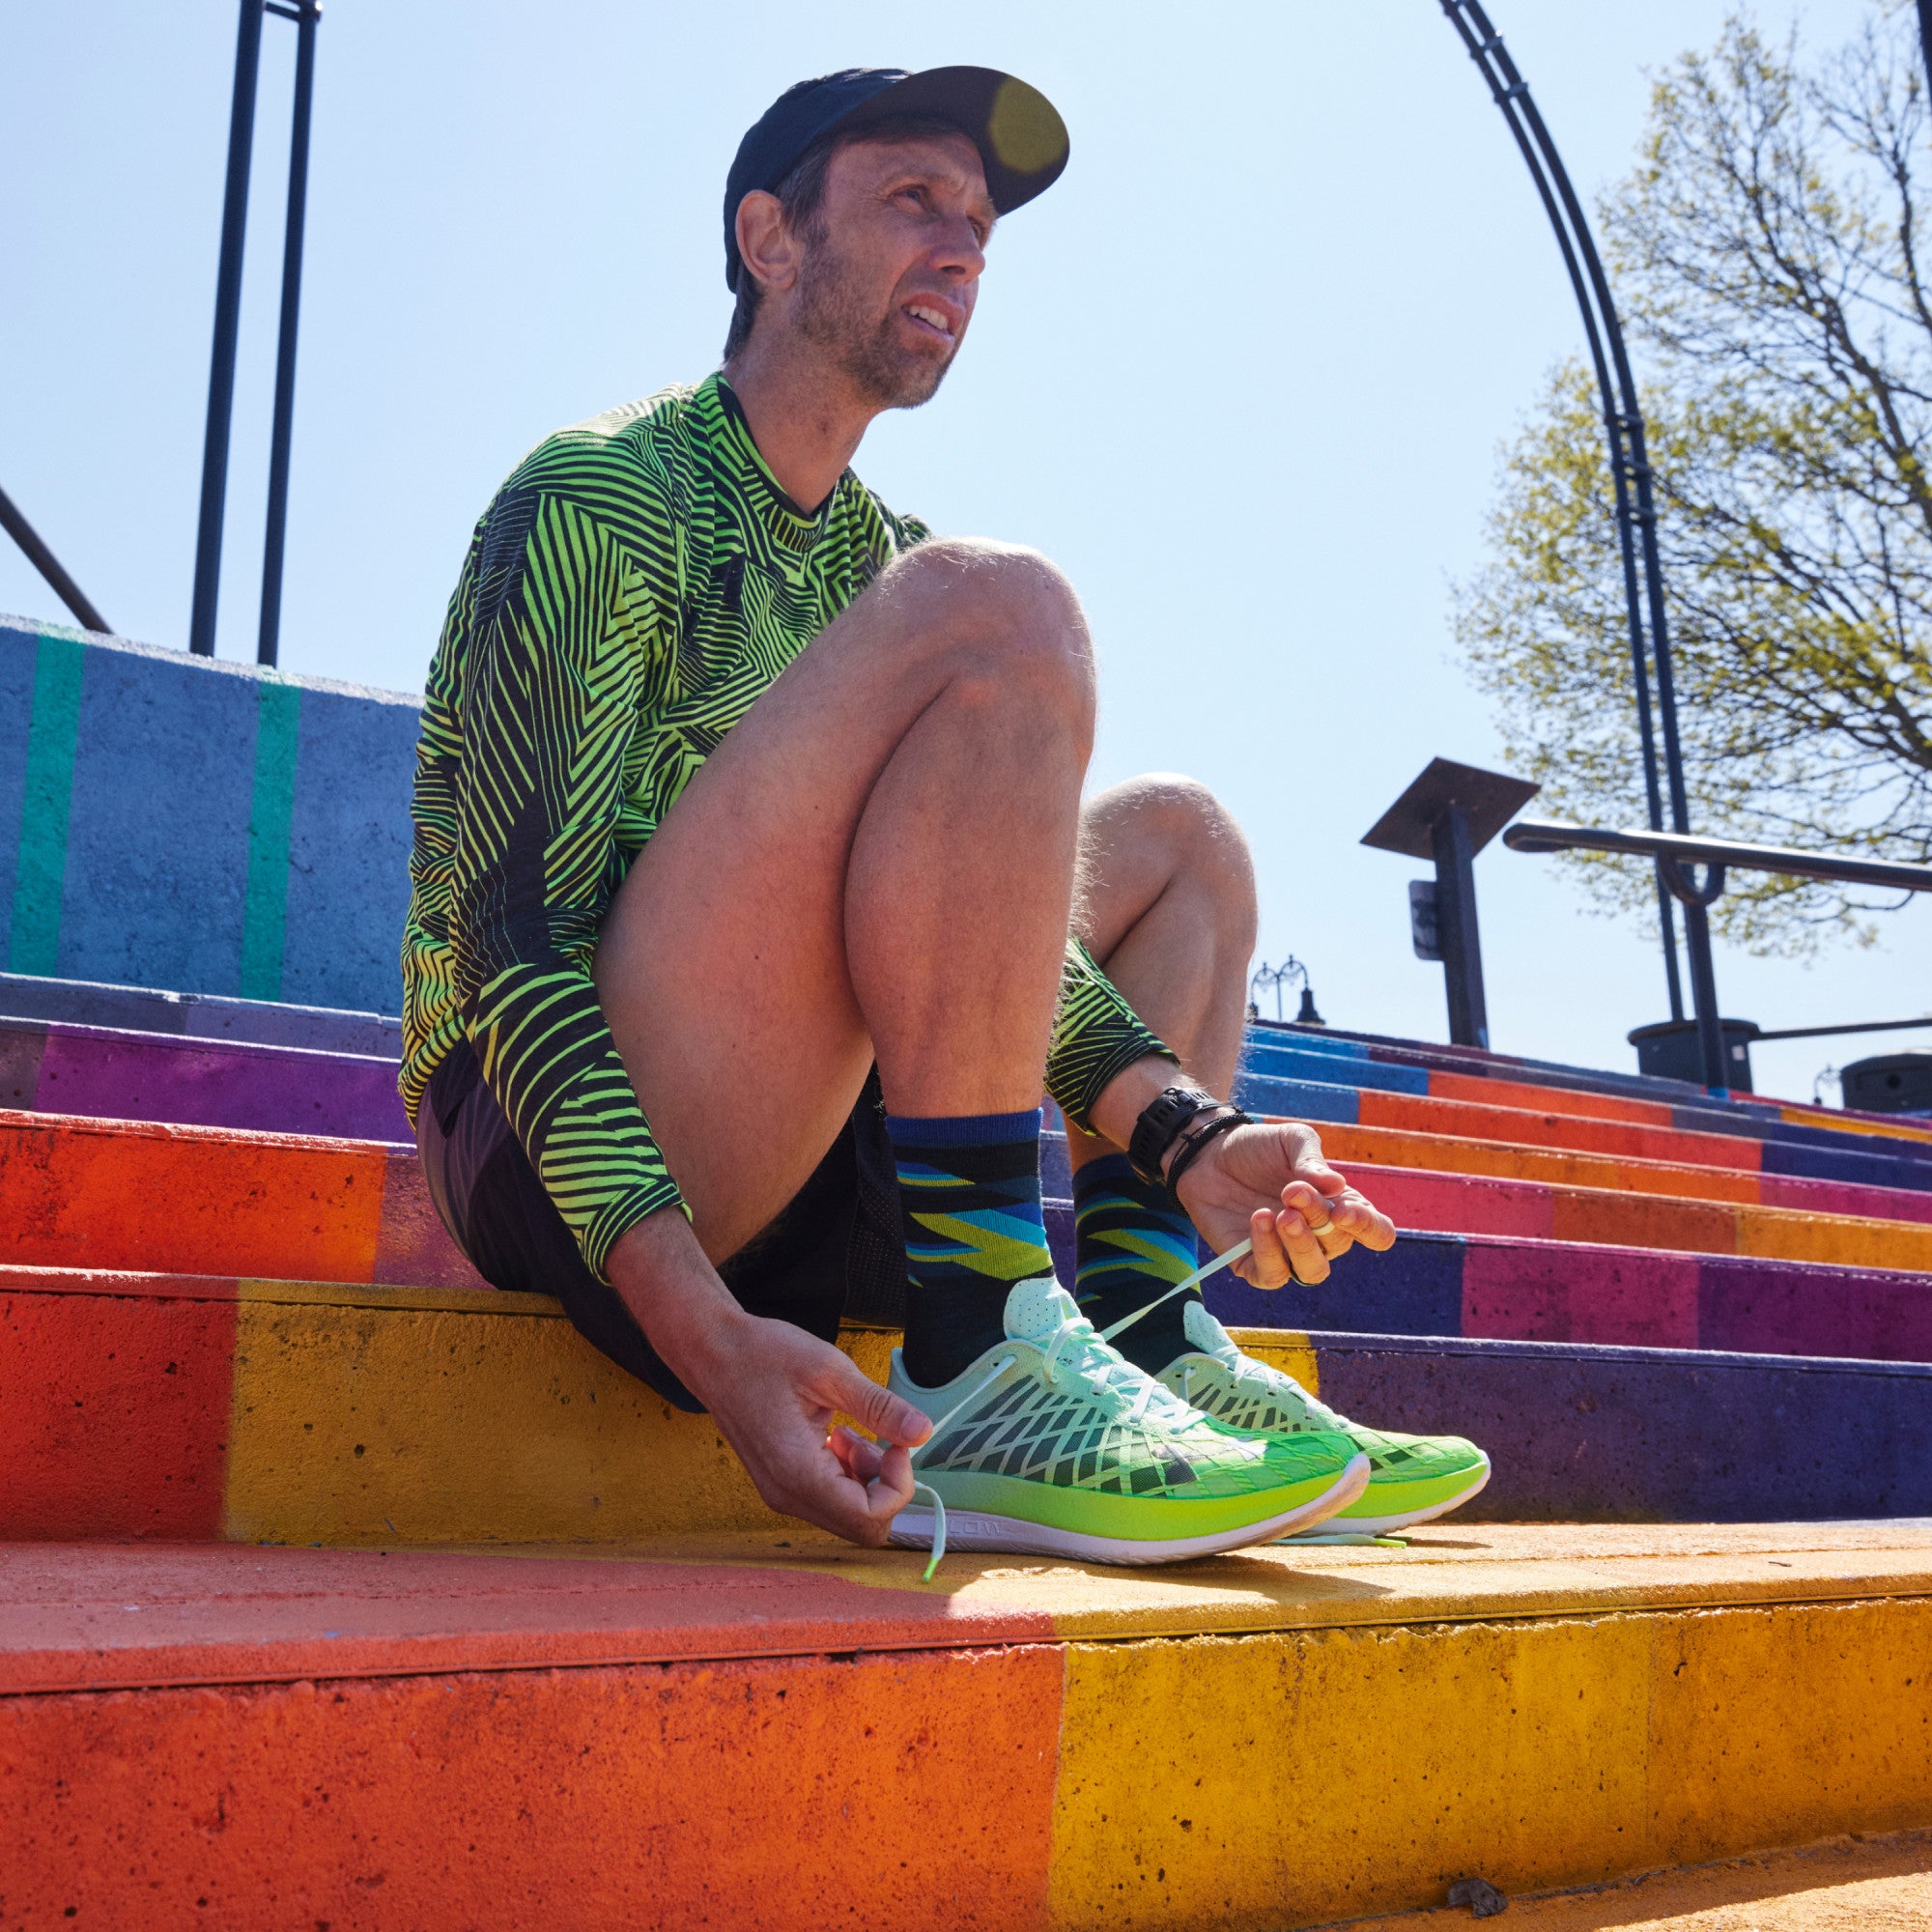 Model sitting on colorfully painted concrete steps while wearing 1056 socks in black colorway and lacing up bright green running shoes.